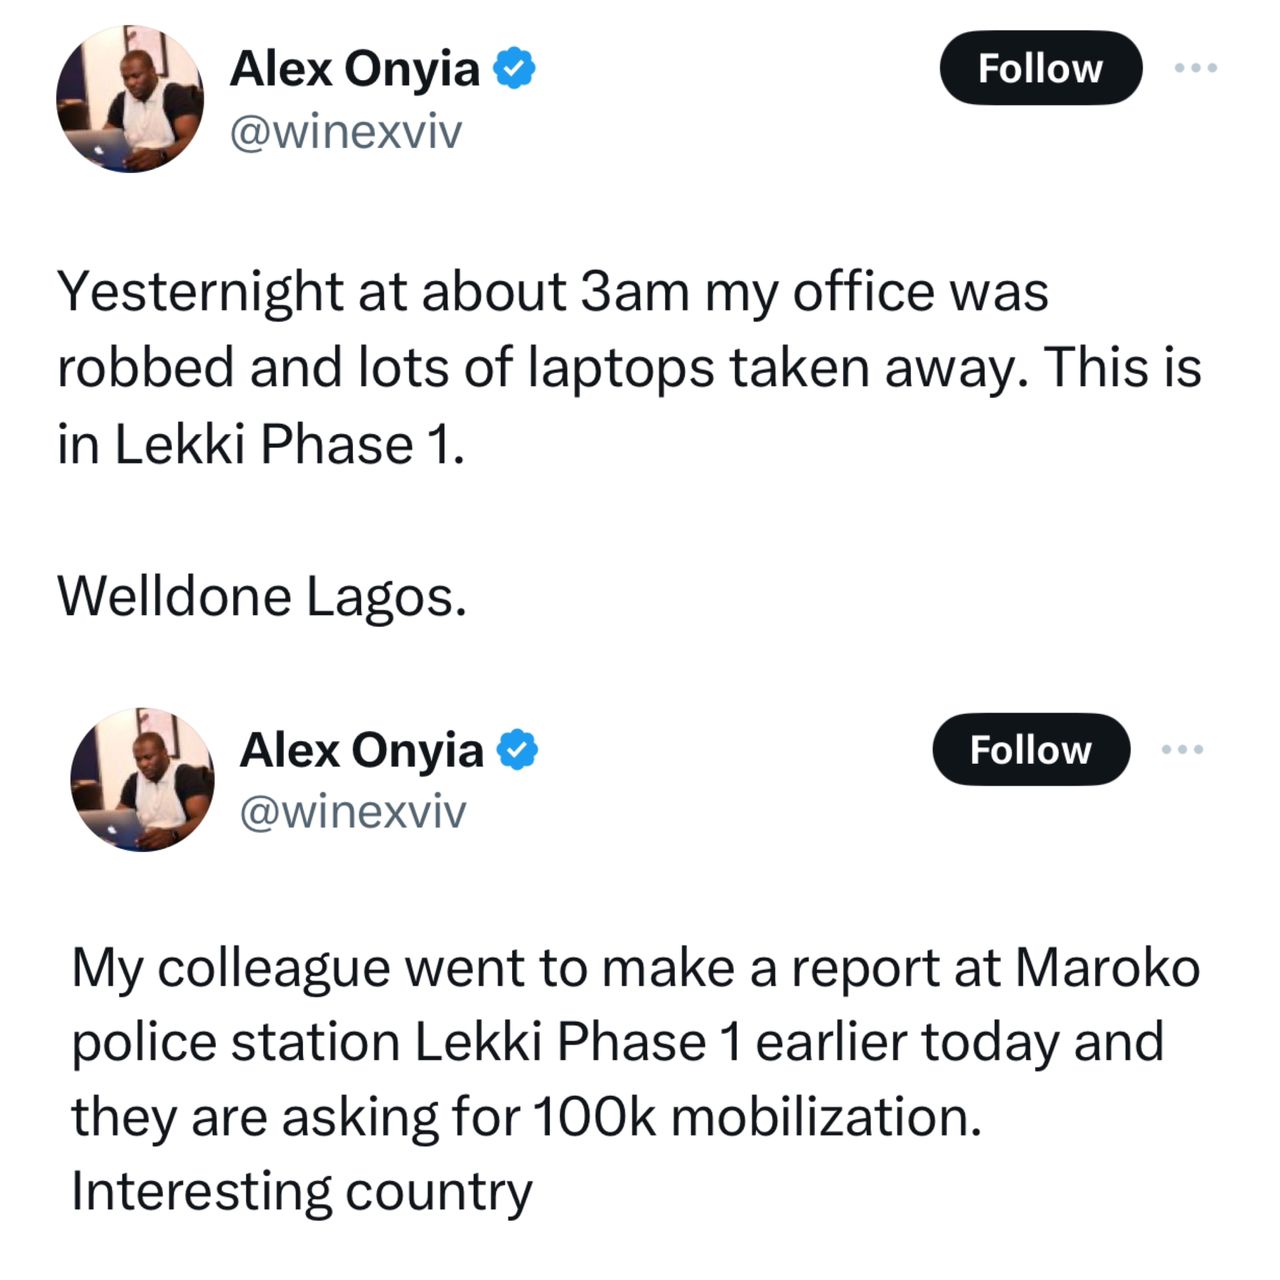 Don?t succumb to extortion - Lagos police spokesperson advises man who went to Maroko police station after his office was burgled and was told to pay N100k for mobilization